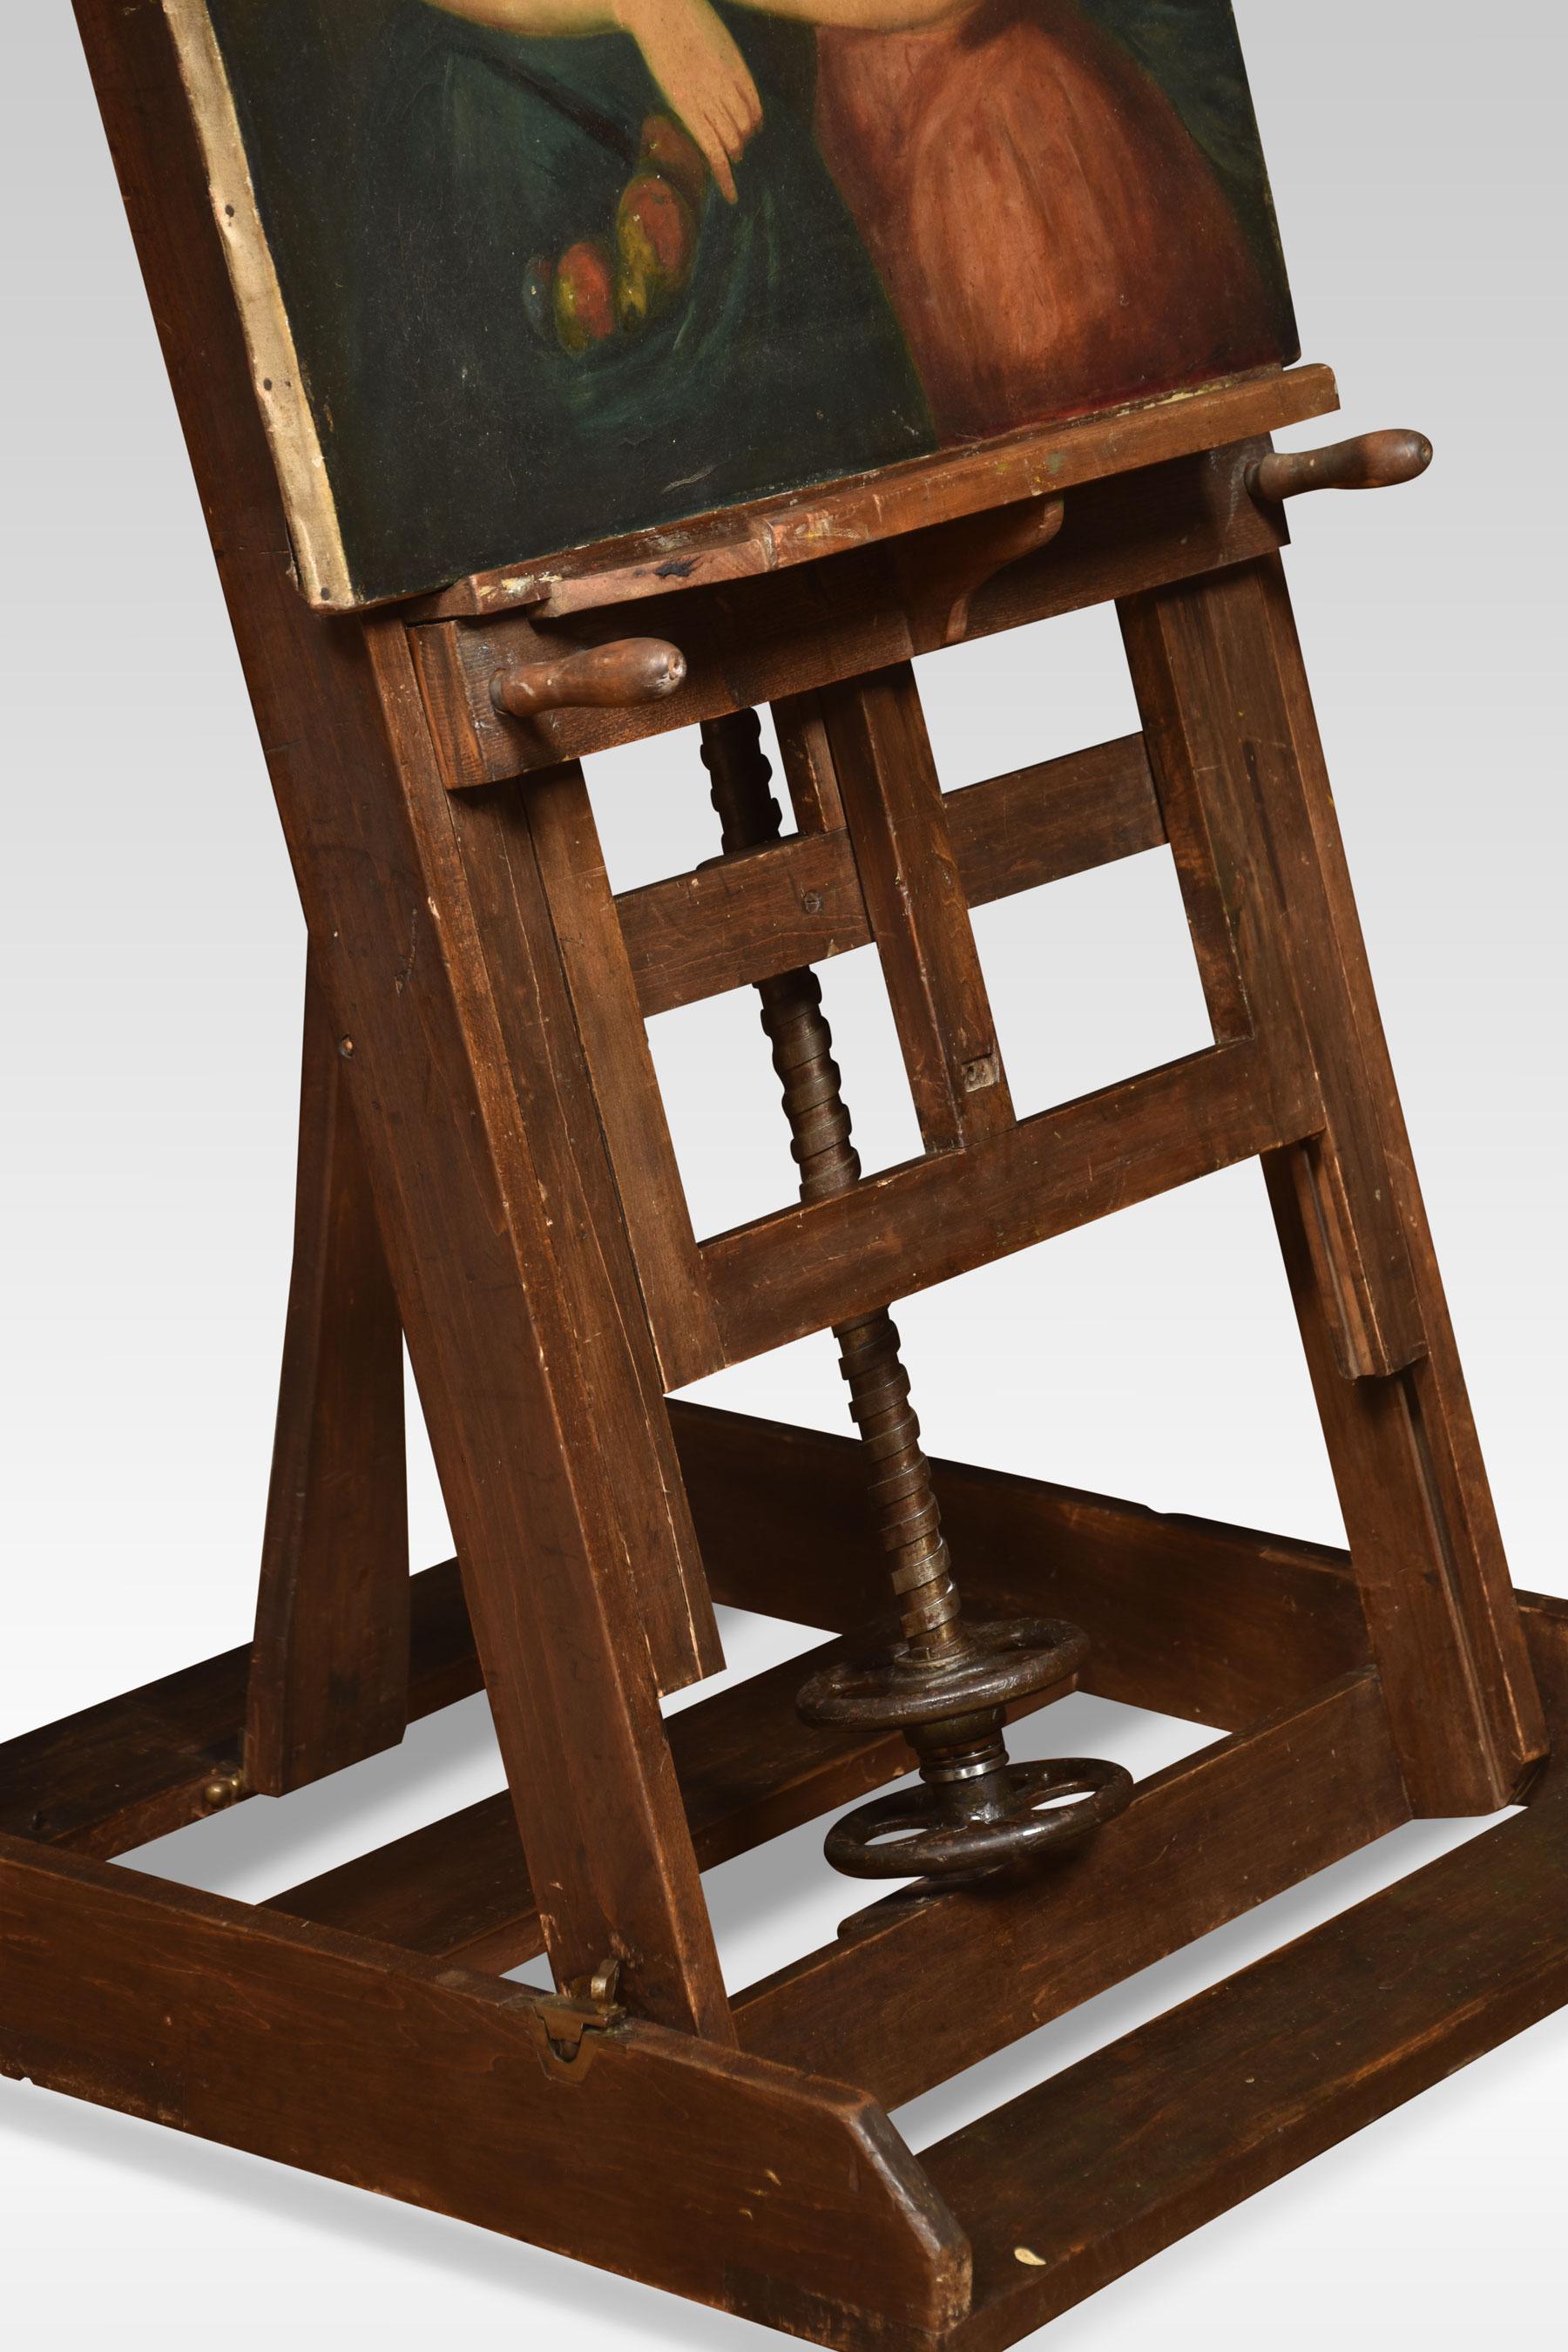 Windsor and Newton fully adjustable artist’s easel. This easel has a back and forth tilt adjustment, and its height can be adjusted by two separate winding wheels which are working perfectly. All raised up on trestle base terminating in original